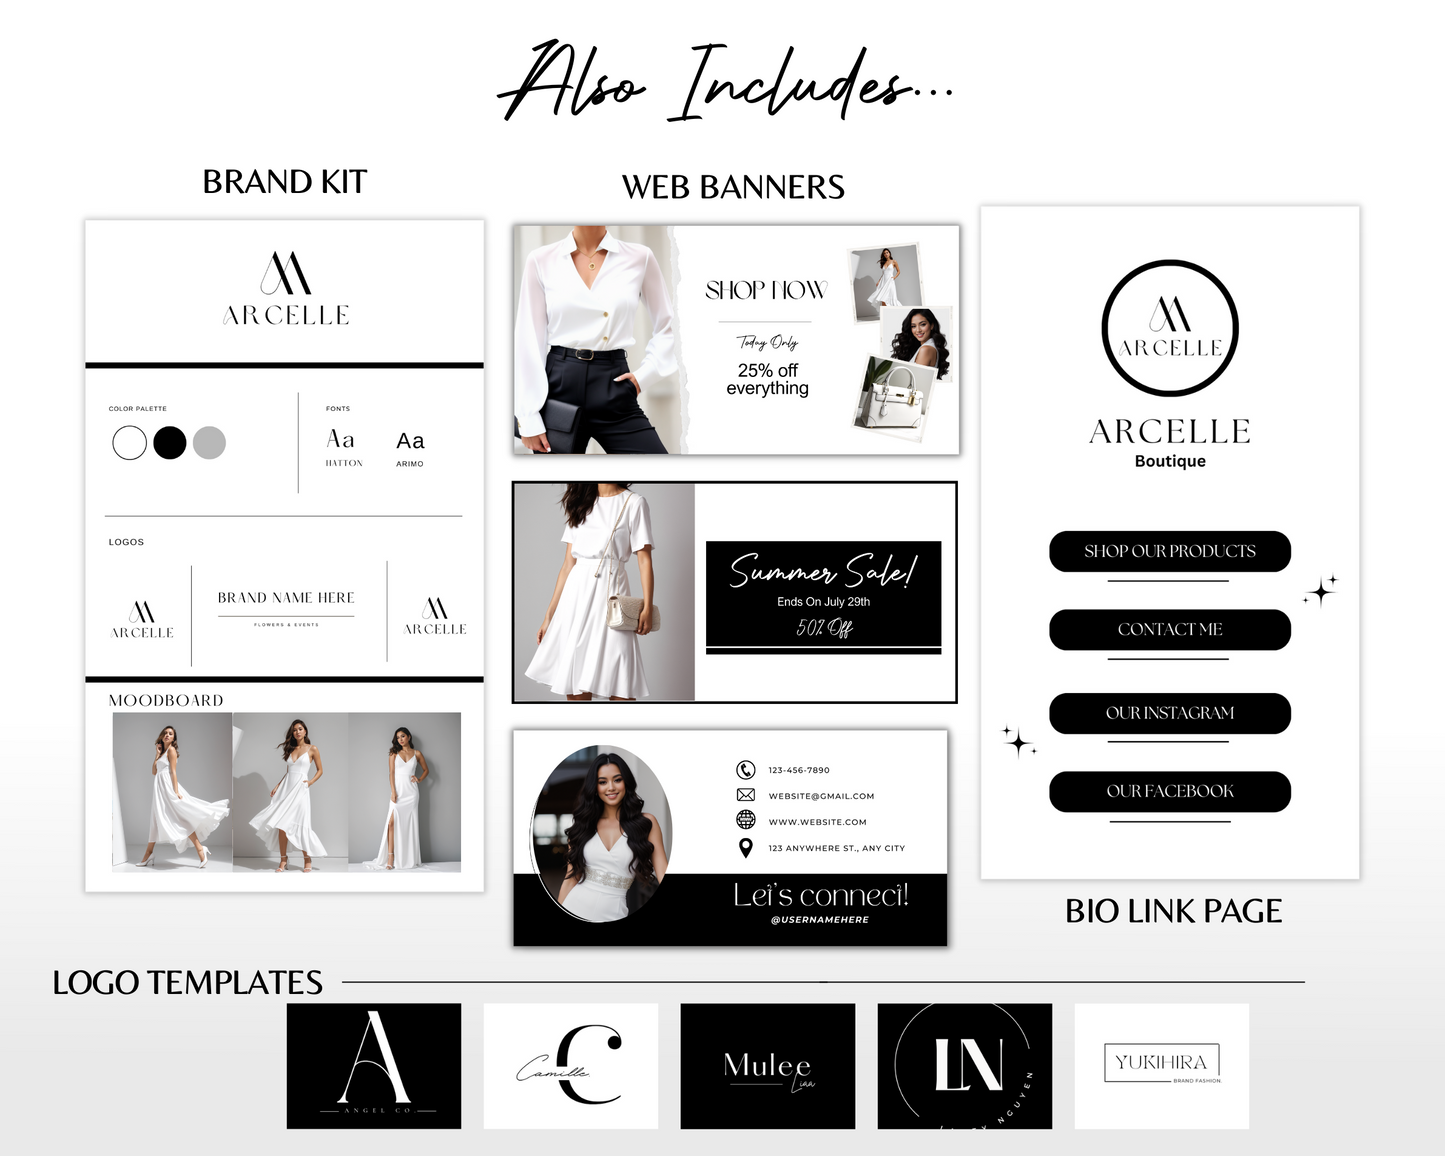 Shopify Website Template | Clean White